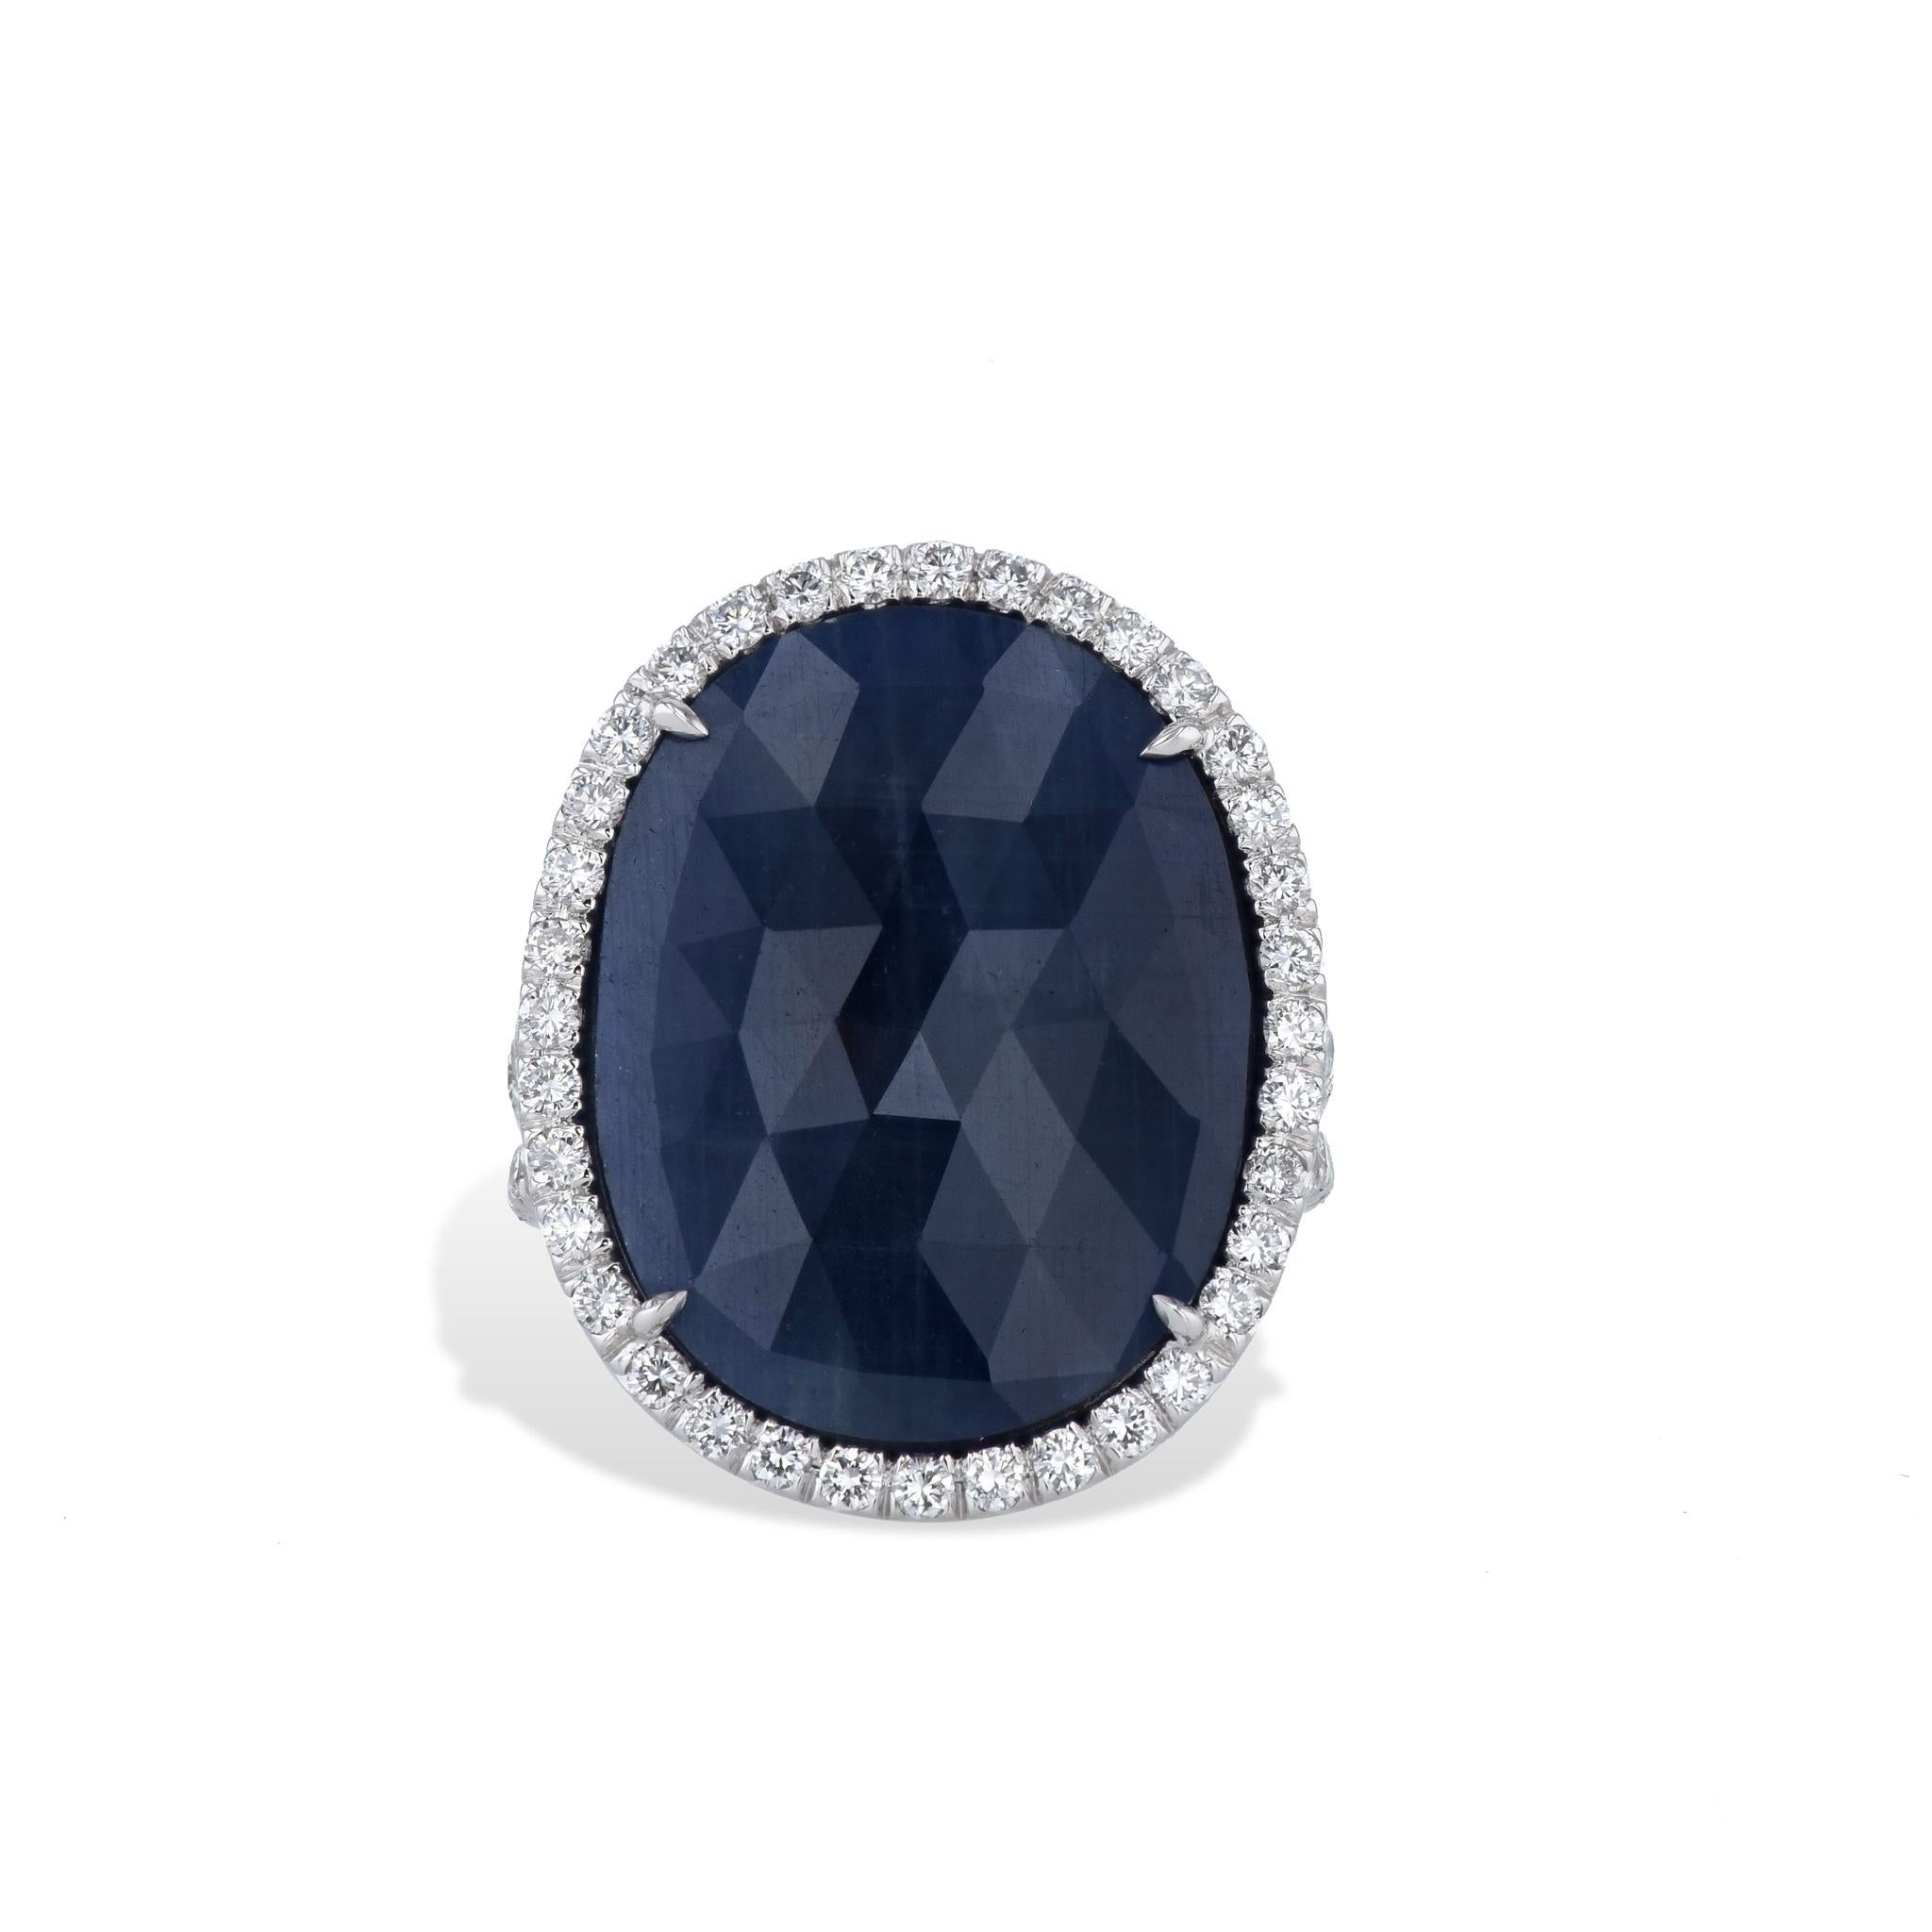 Become enchanted in this timeless beauty with this captivating beautiful blue sapphire slice and pave diamond ring. 
Beautifully handcrafted in 18 karat white gold, which features an alluring 19.94 carat sapphire slice at its center with shimmering